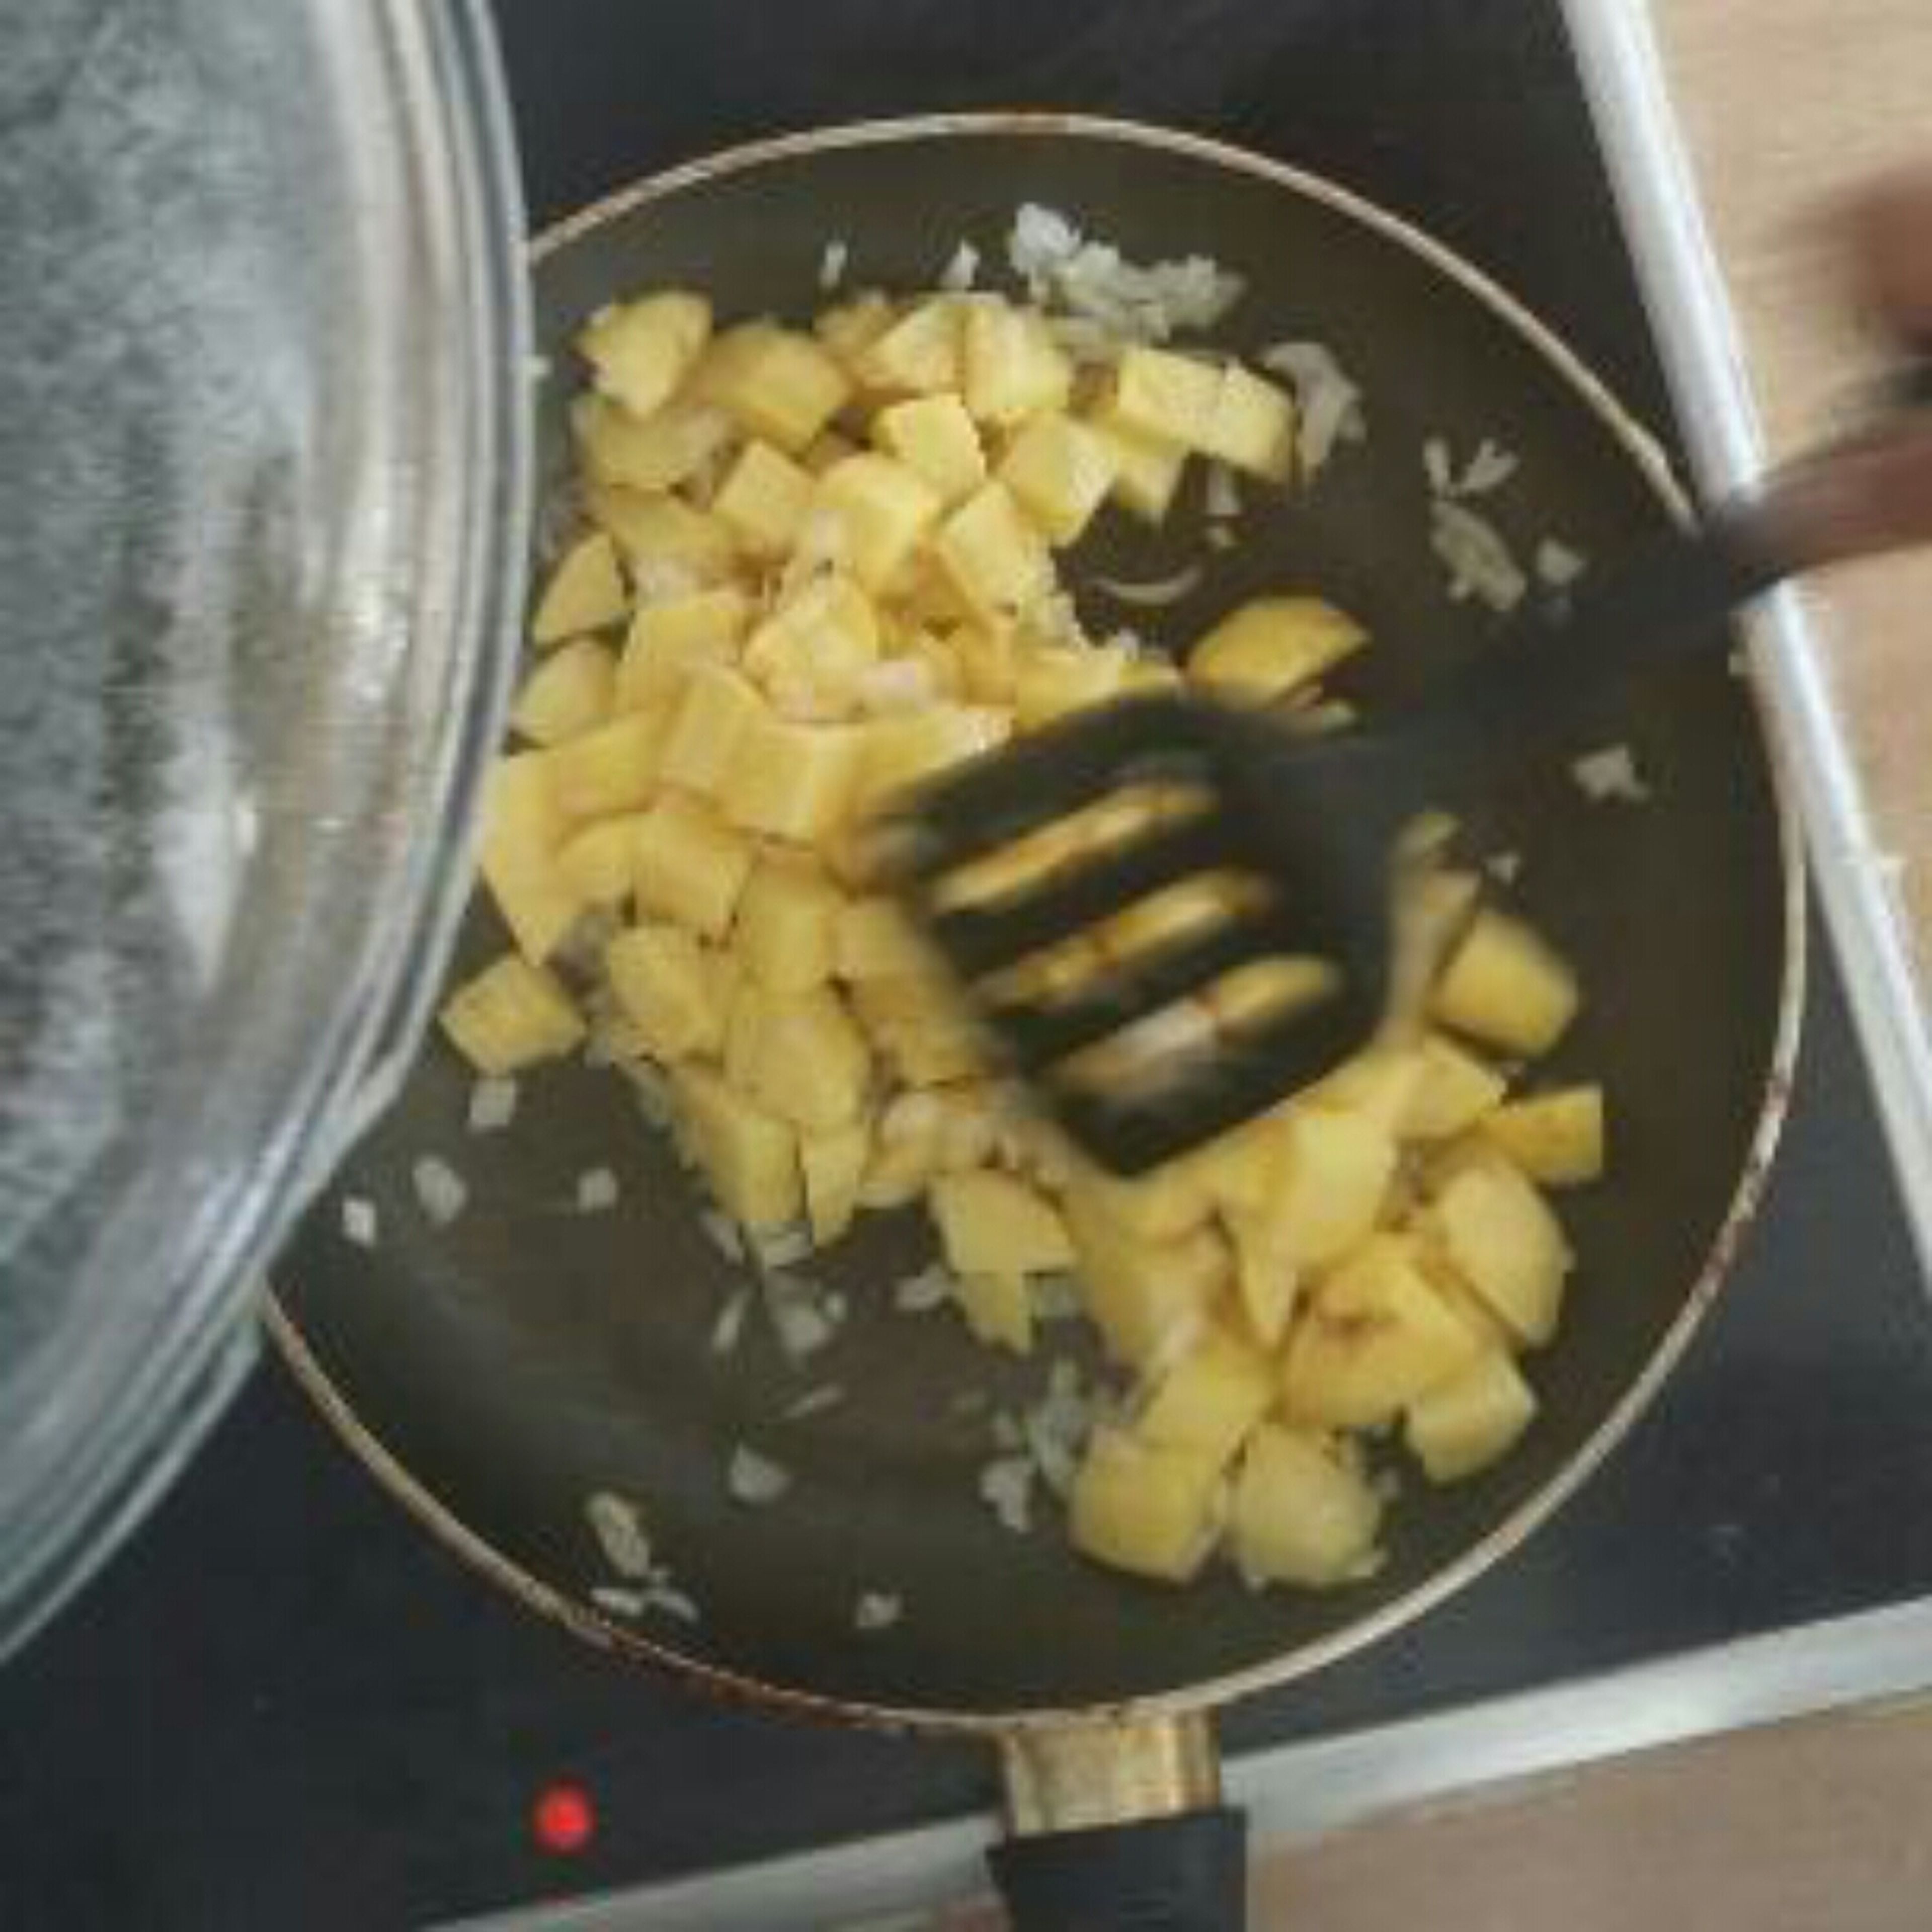 fry the onions, then add potatos and carrots and some water